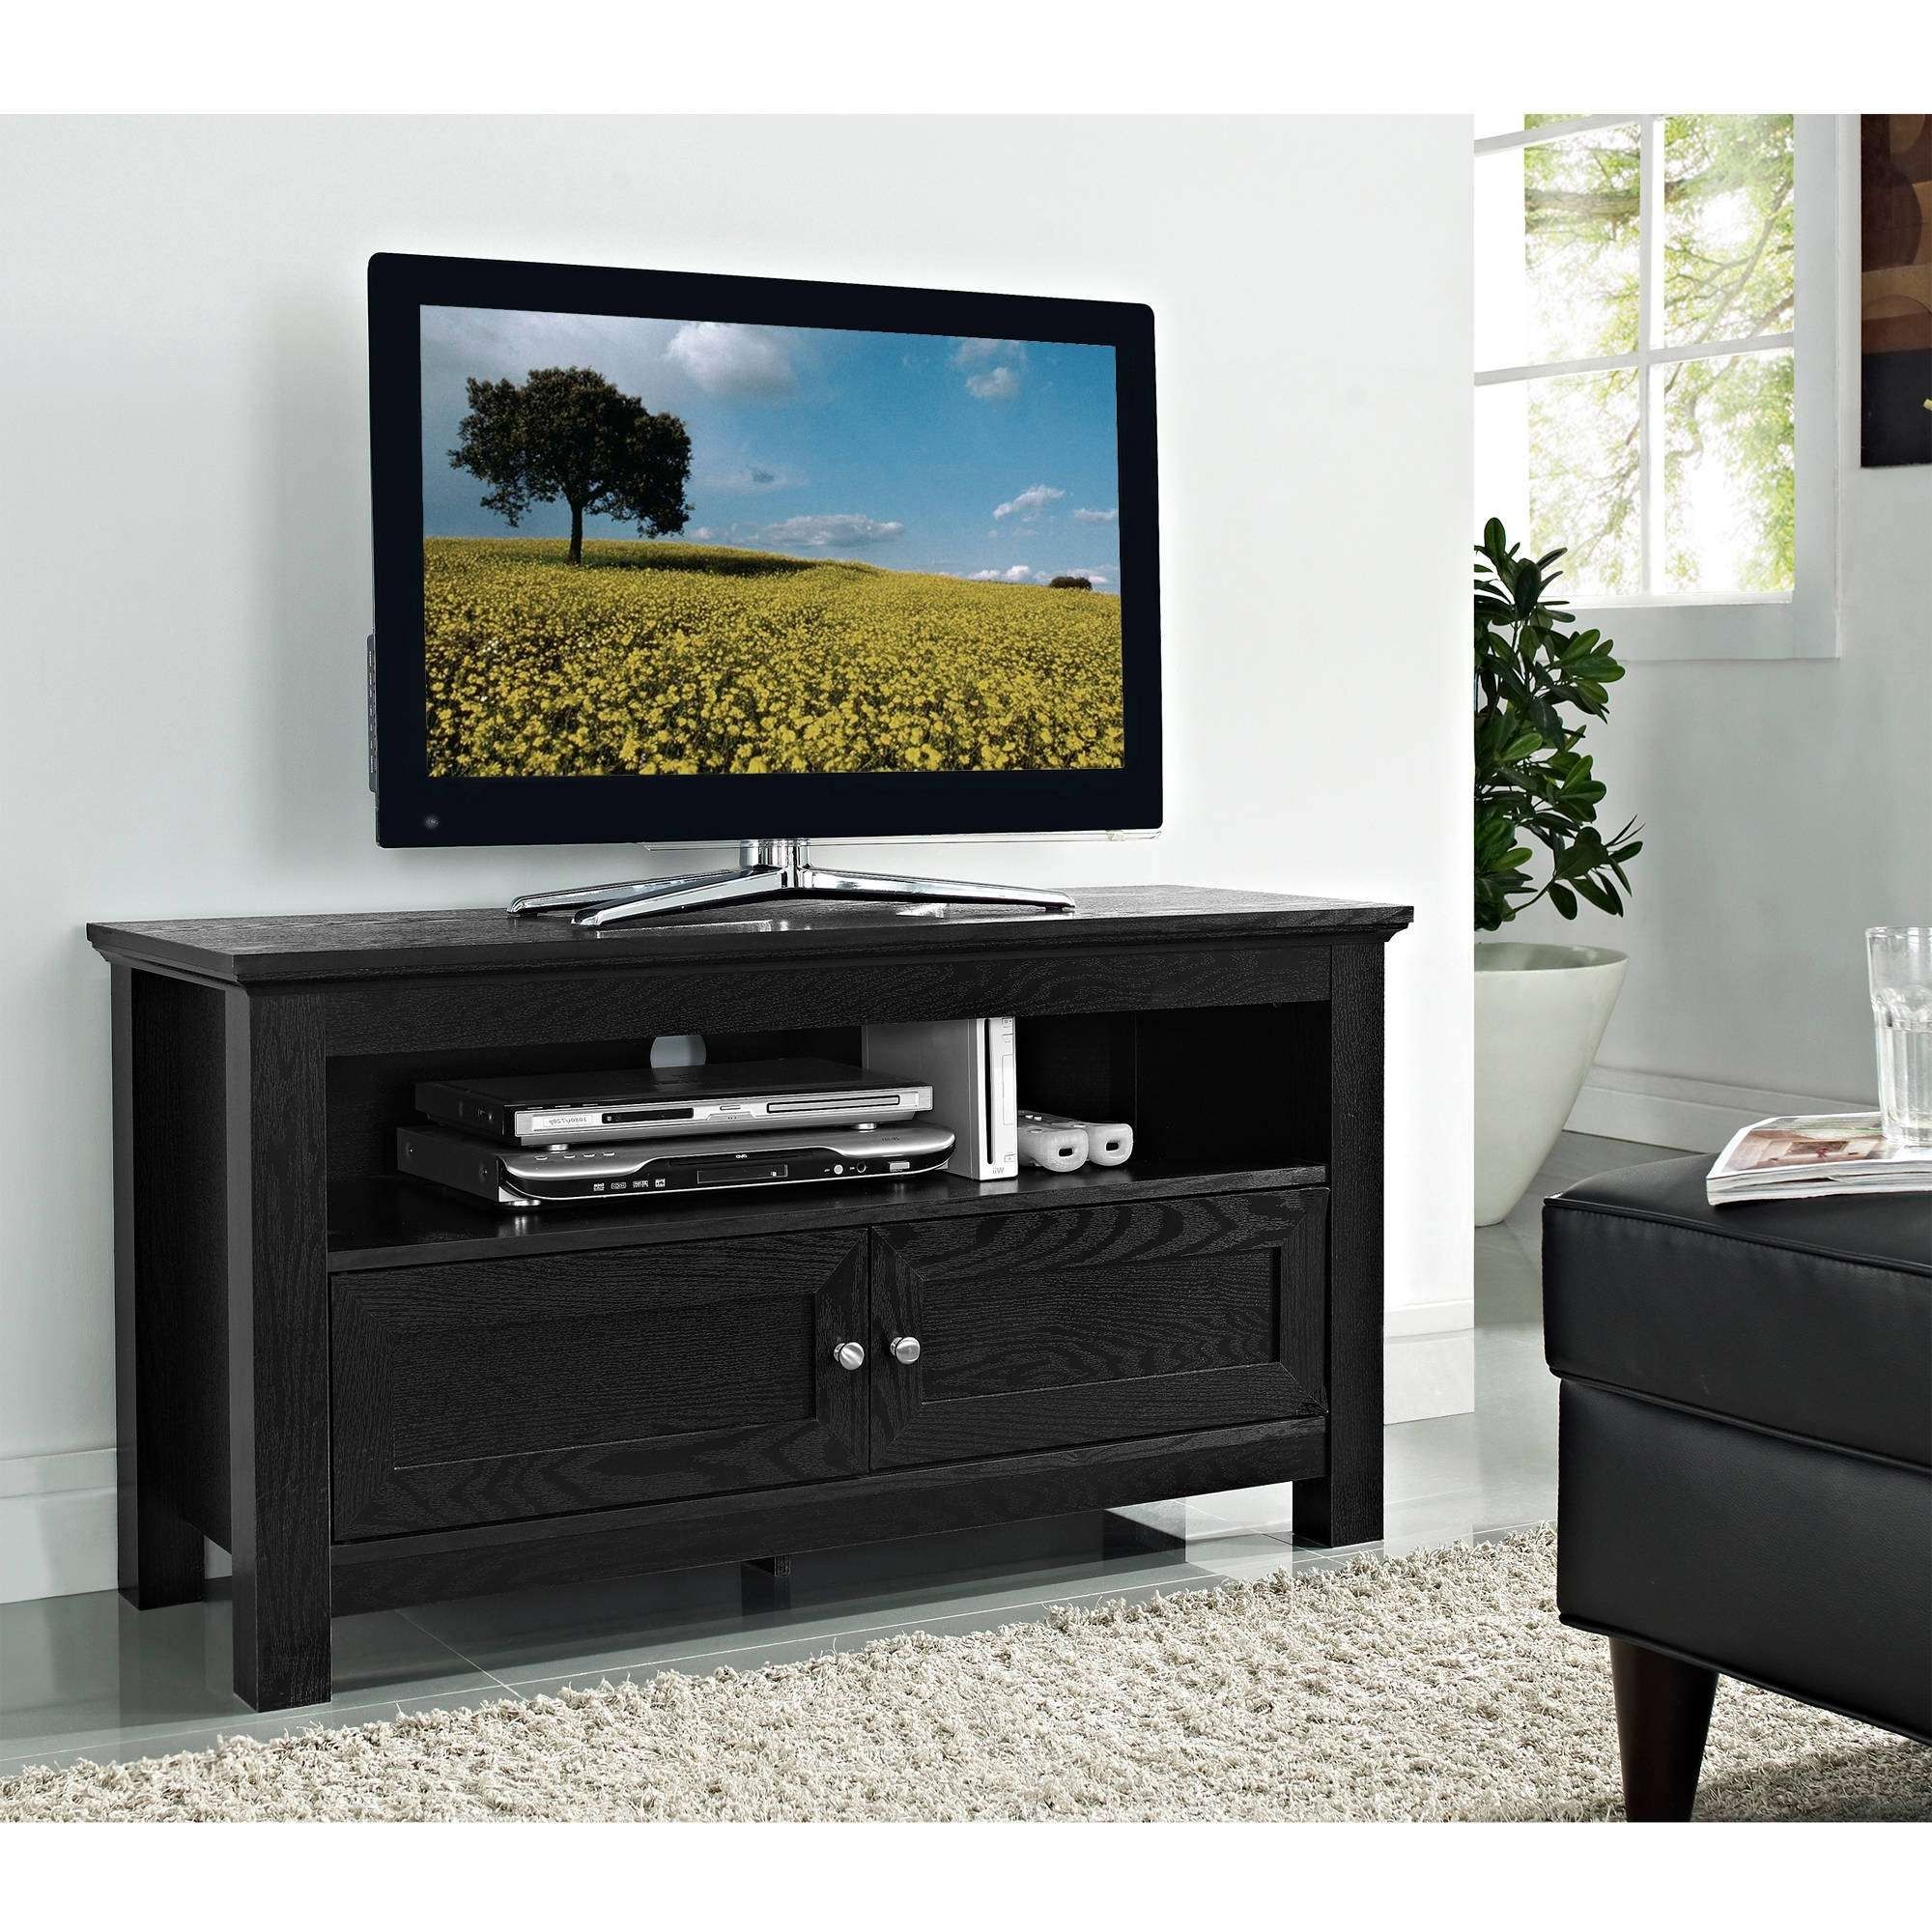 Wall Units: Amazing Walmart Entertainment Center Tv Stands Tv Intended For Cheap Wood Tv Stands (View 7 of 15)